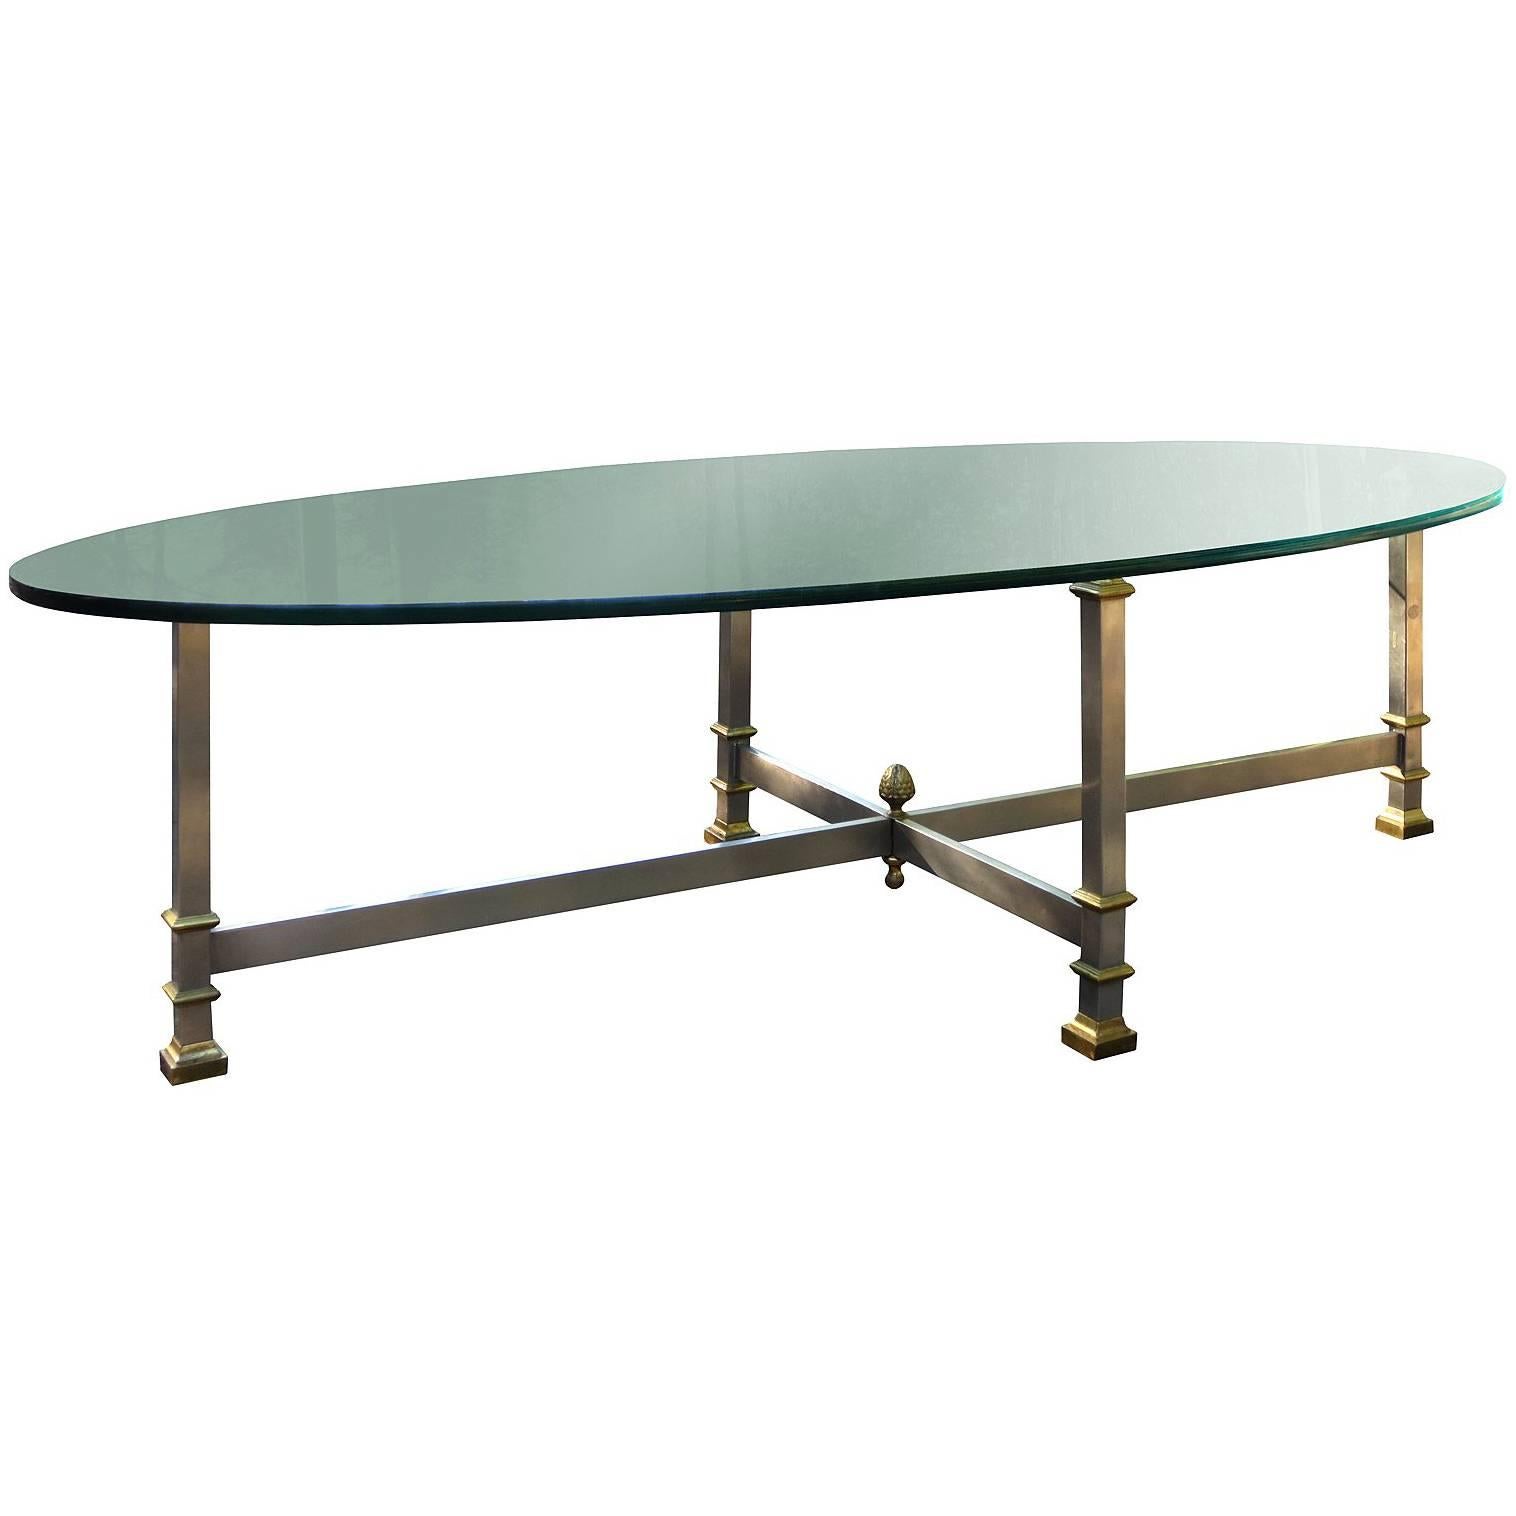 Mid-20th Century Bronze Coffee Table with Glass Top